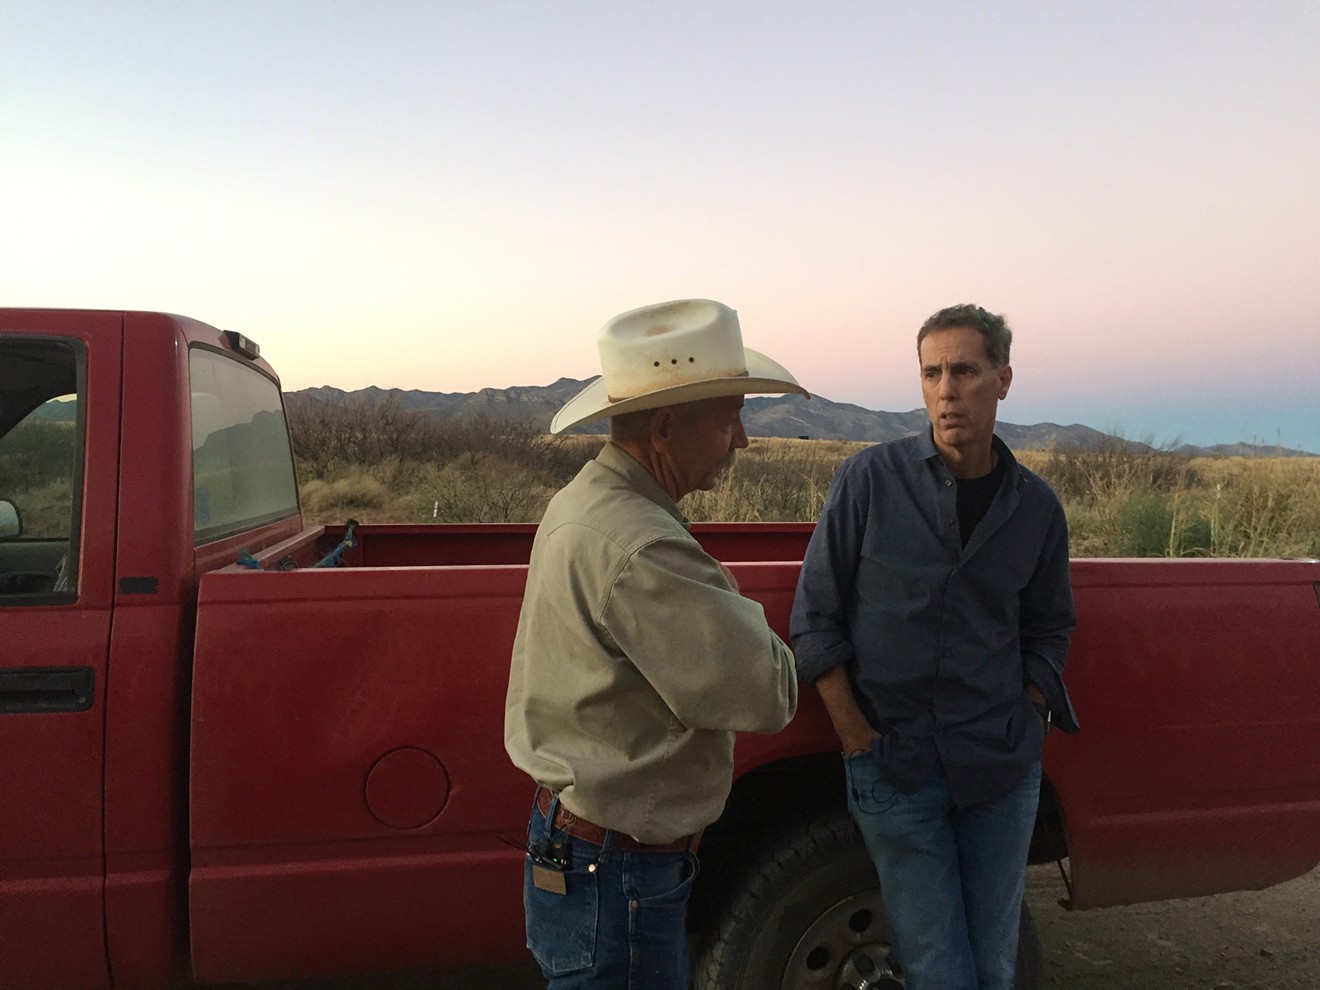 John Ladd (left), a rancher near Bisbee, Arizona, who often appears in the press touting Donald Trump's border policies, appears with director-producer James D. Stern in American Chaos.